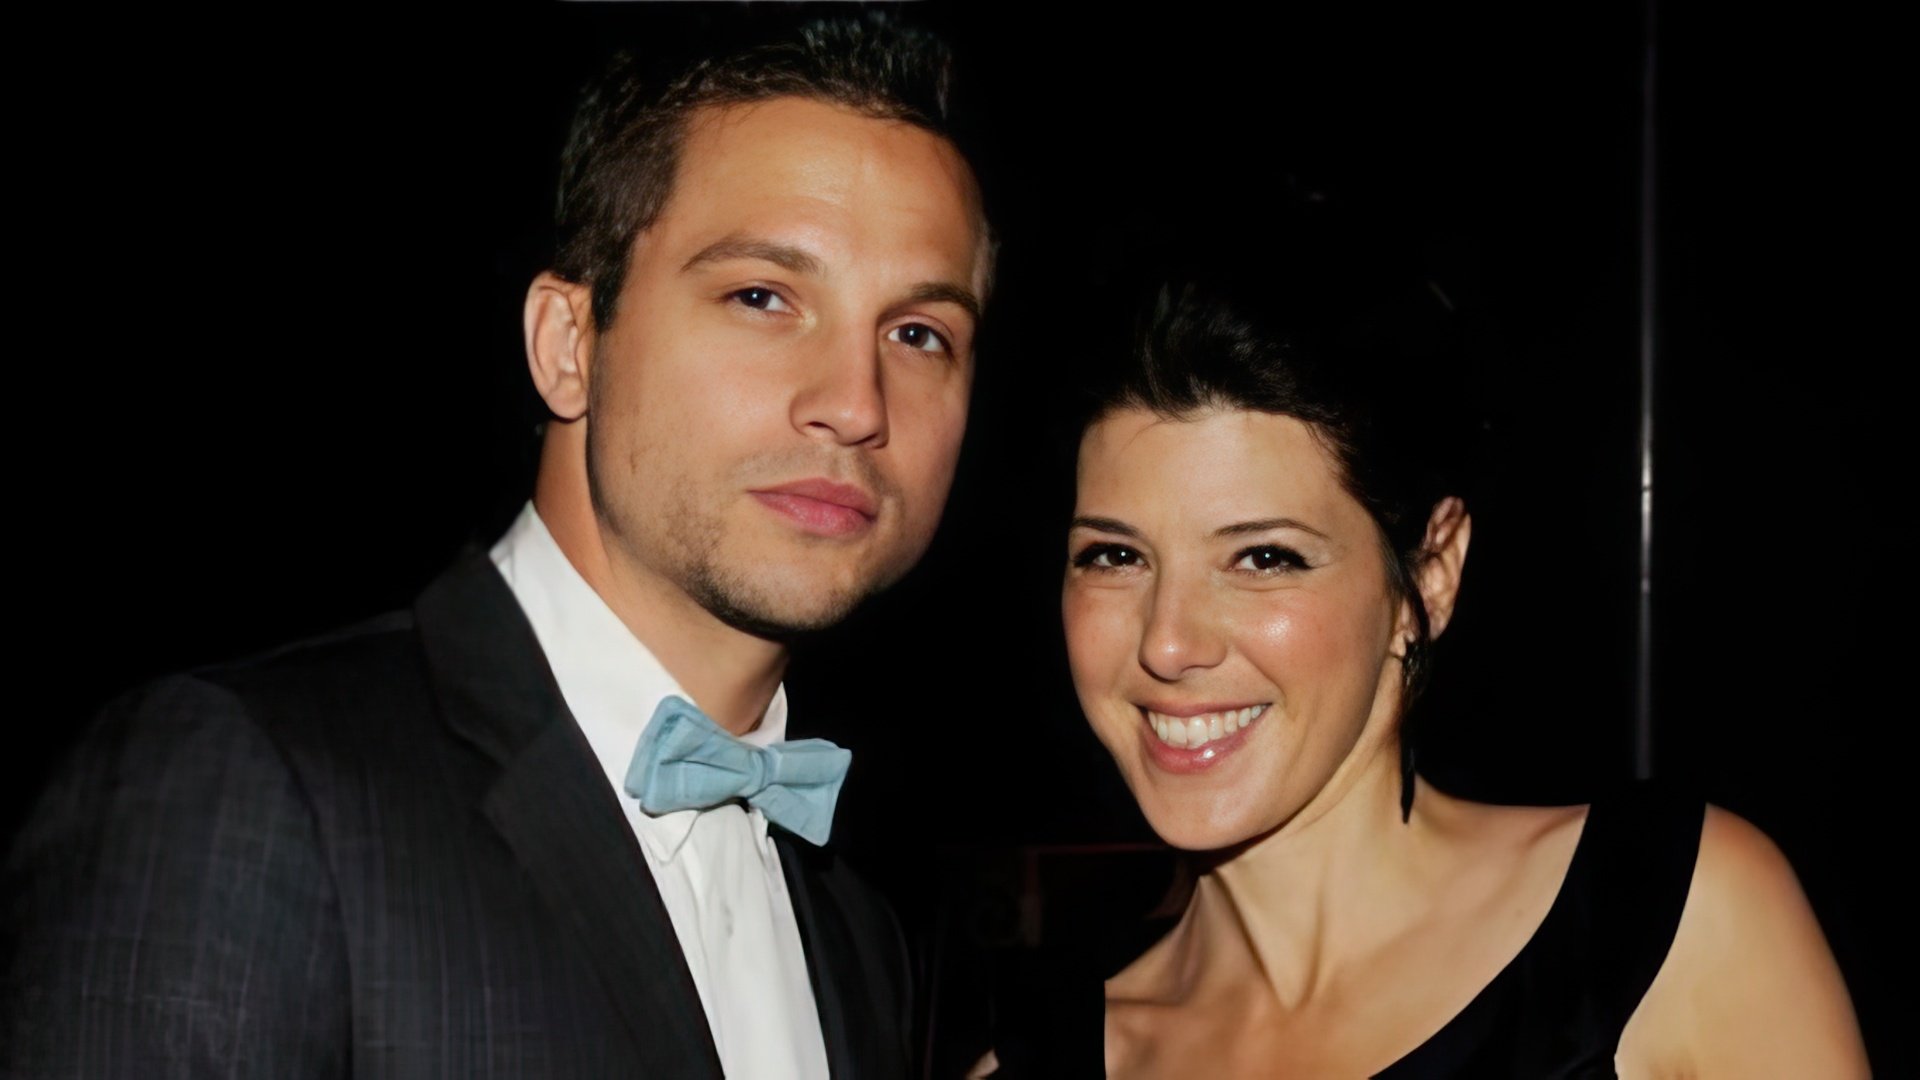 Marisa Tomei and Logan Marshall-Green dated for 4 years